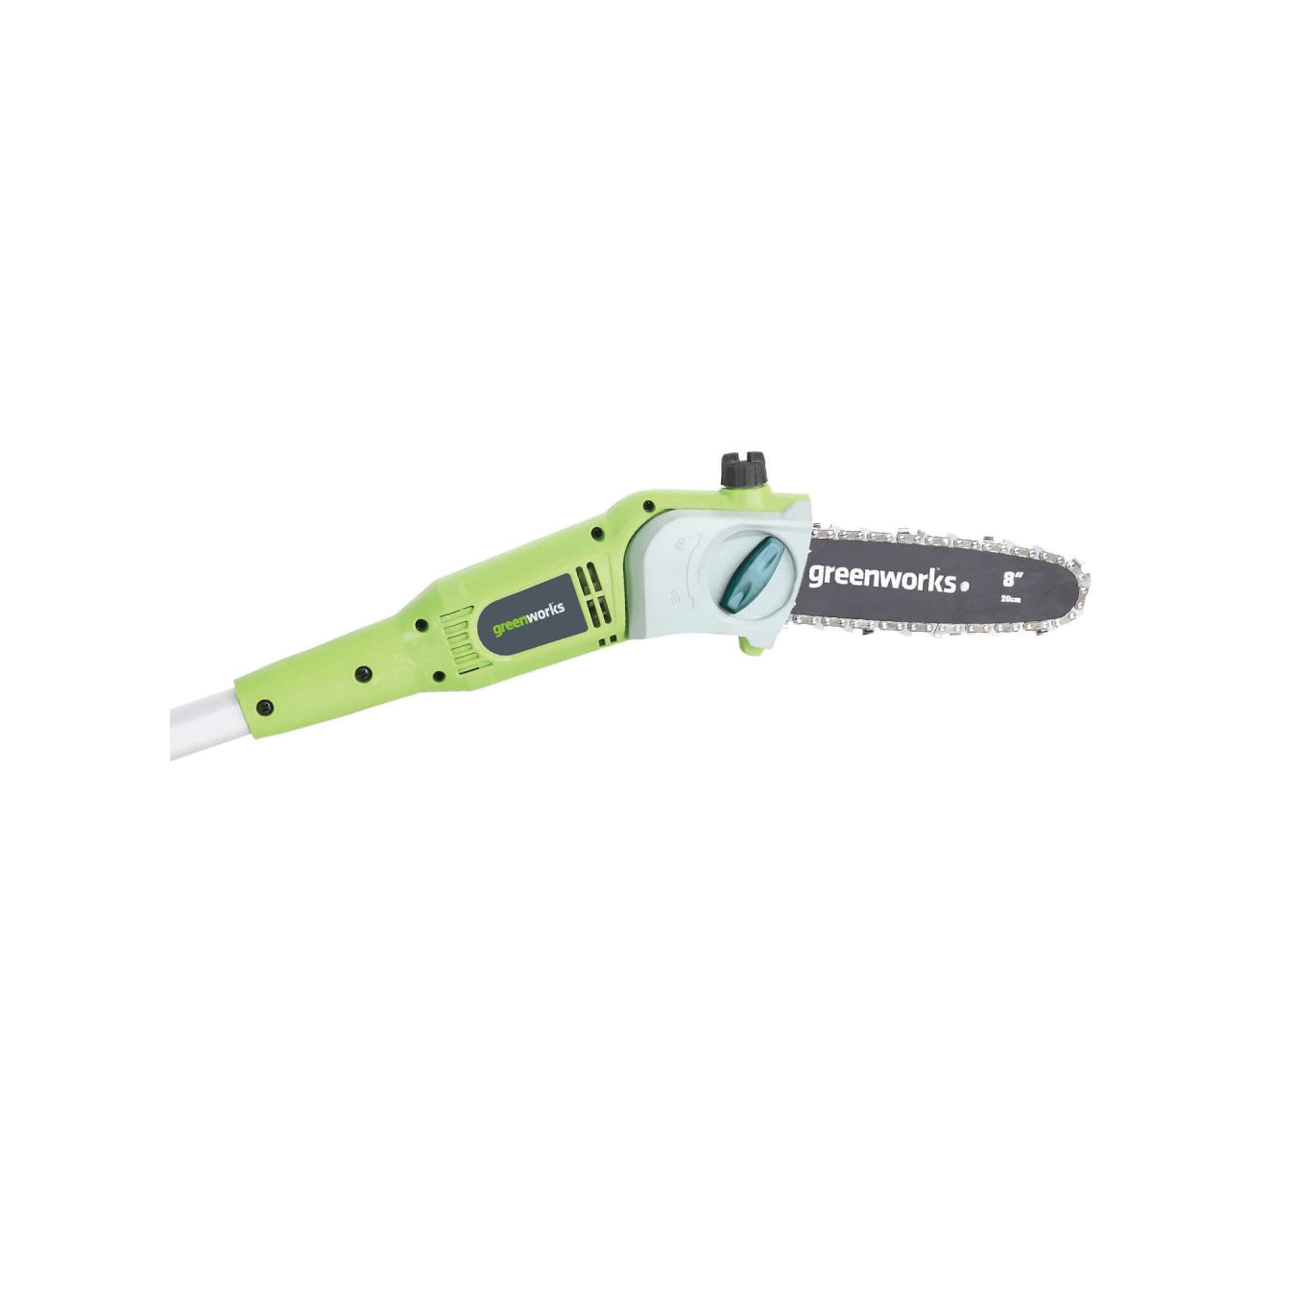 Greenworks 20192 Pole Saw, 6.5 A, 8 in Blade, Aluminum Pole, 95 in OAL - 2